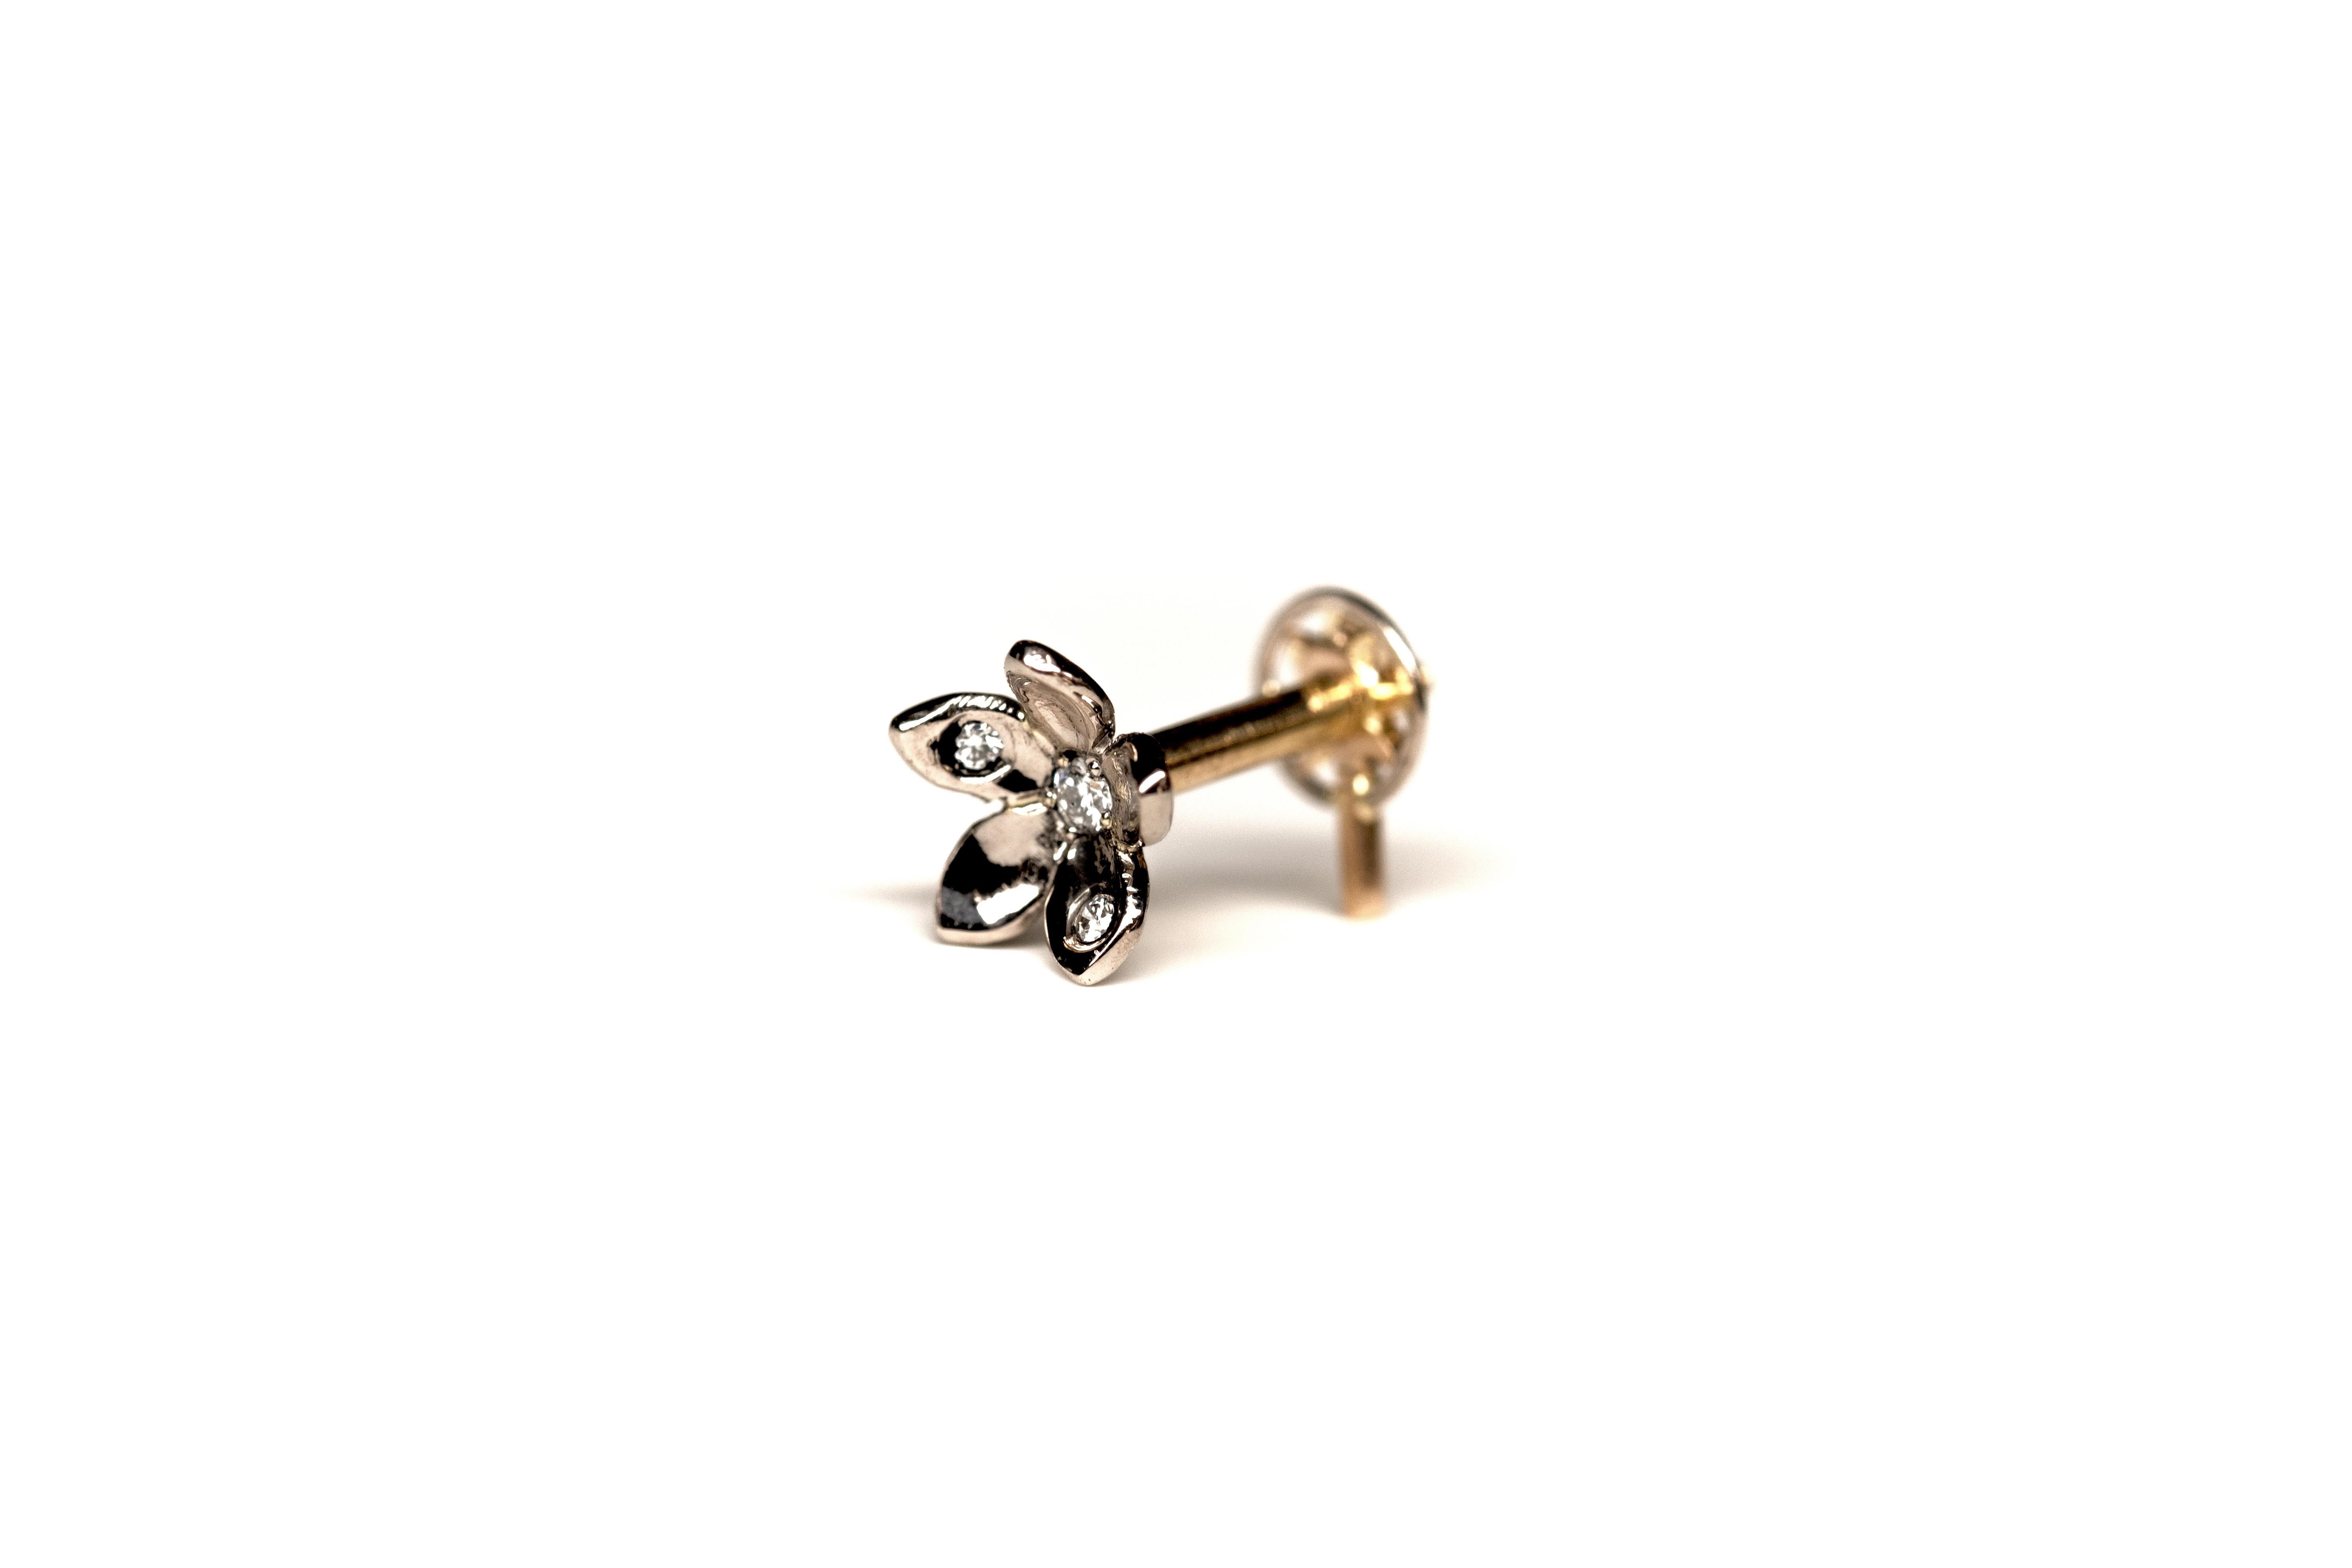 Flower-shaped ear piercing, completely handmade from 18K yellow and palladium white Fairmined gold and Canadamark diamonds.

The flower screws into the star at the back. The screw is handmade. We suggest closing it gently and being careful not to